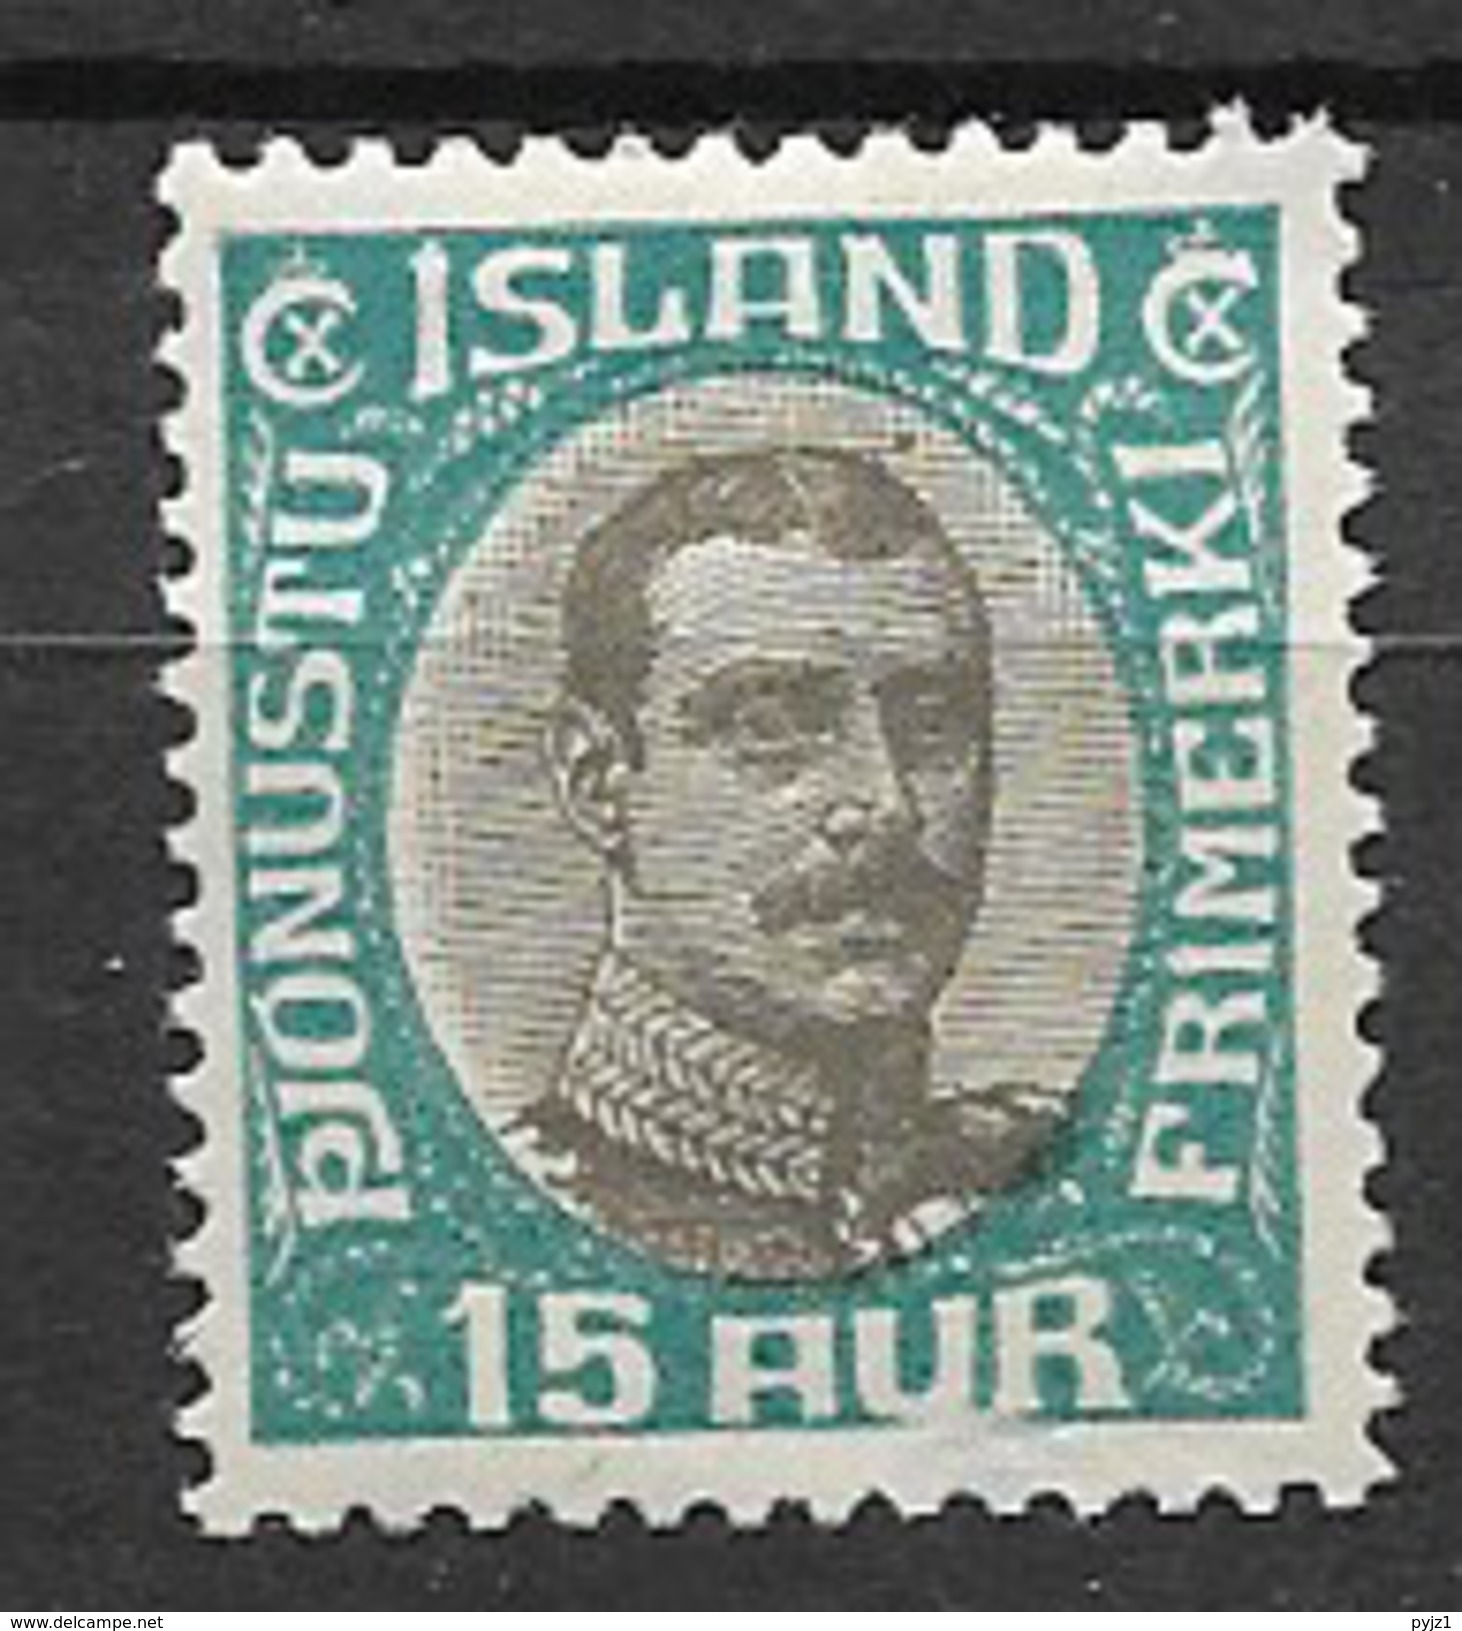 1920 MH Iceland - Service